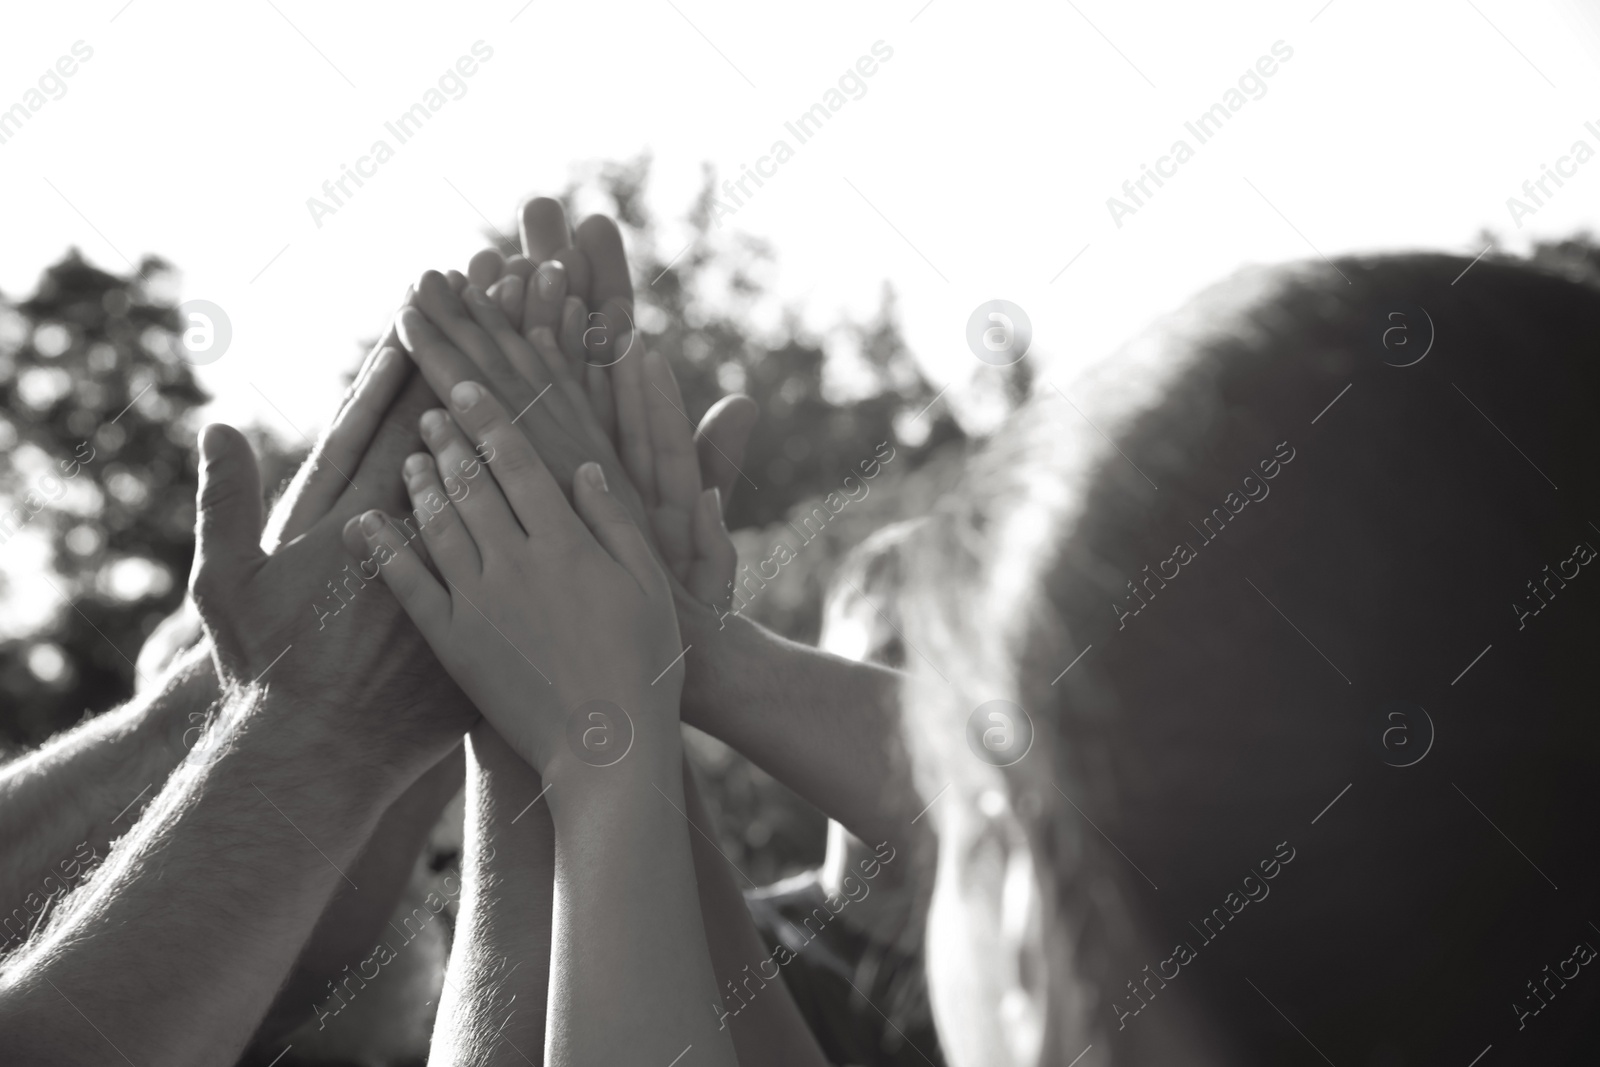 Image of Group of volunteers joining hands together outdoors. Black and white effect